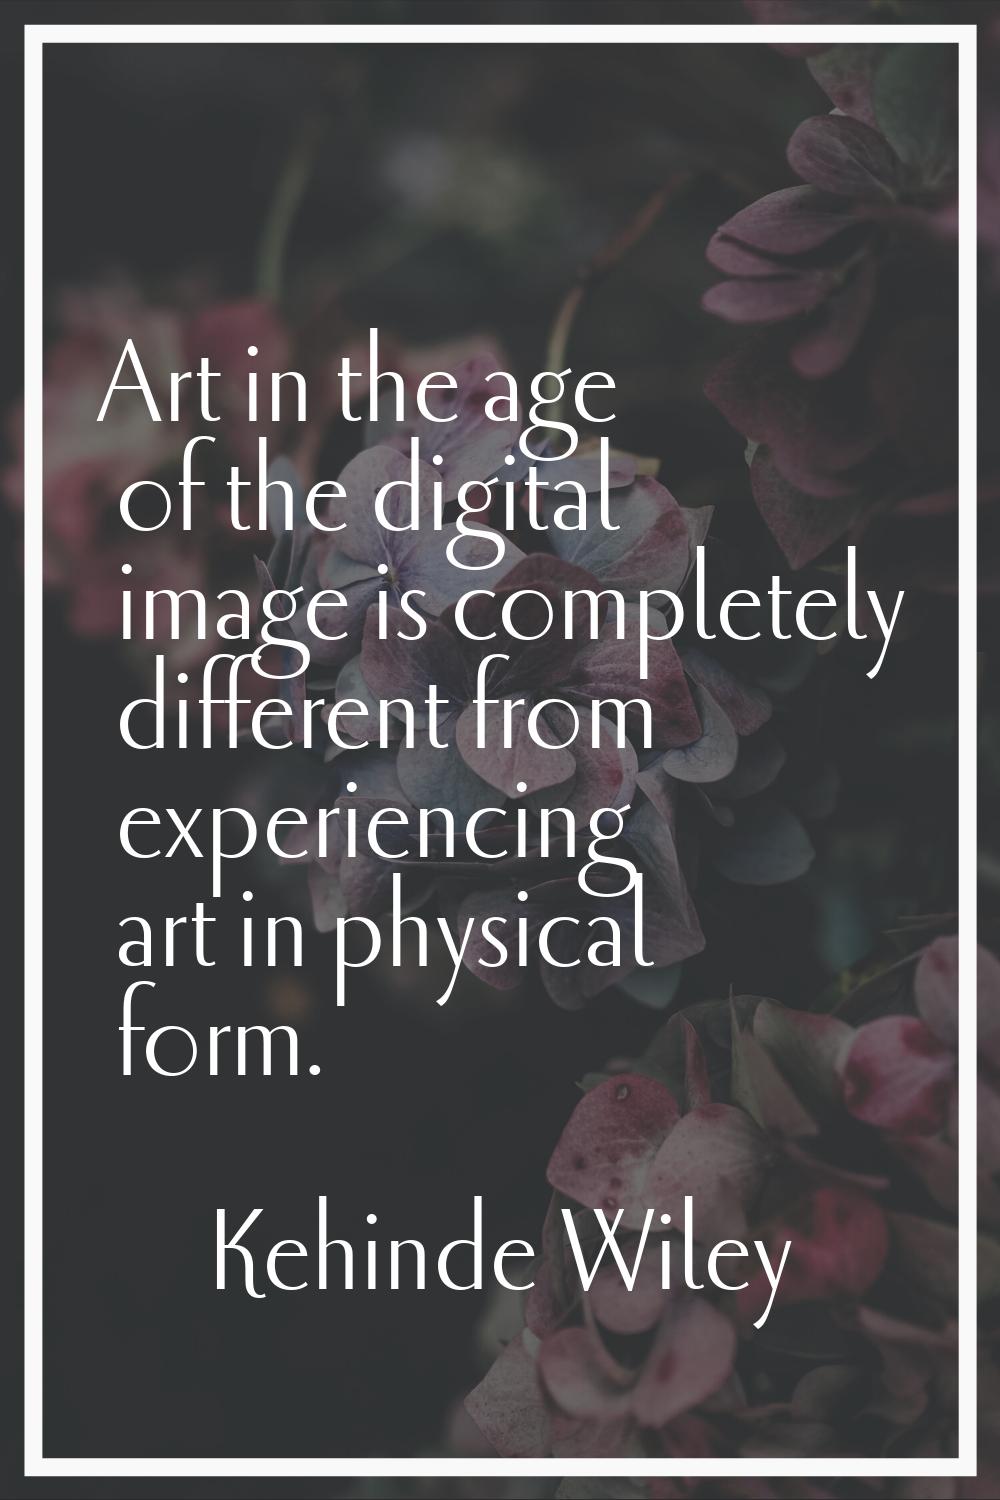 Art in the age of the digital image is completely different from experiencing art in physical form.